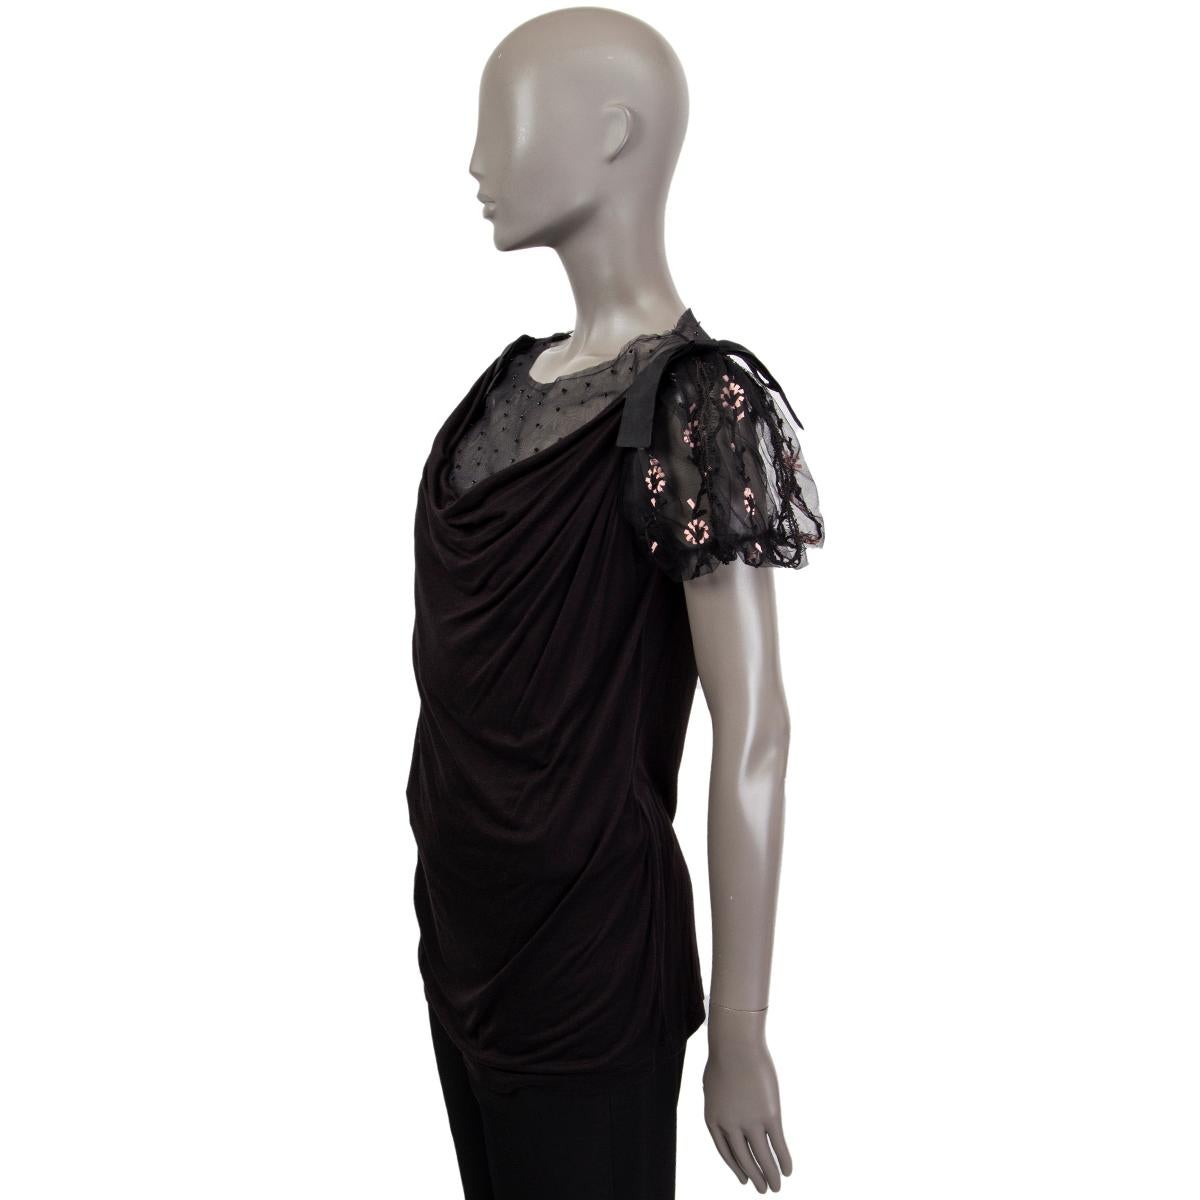 Valentino short sleeve mesh top in black viscose (100%) with black bows, black sequin and rose embroidered details. Unlined. Has been worn and is in excellent condition. 

Tag Size 8
Size M
Shoulder Width 36cm (14in)
Bust 94cm (36.7in) to 96cm